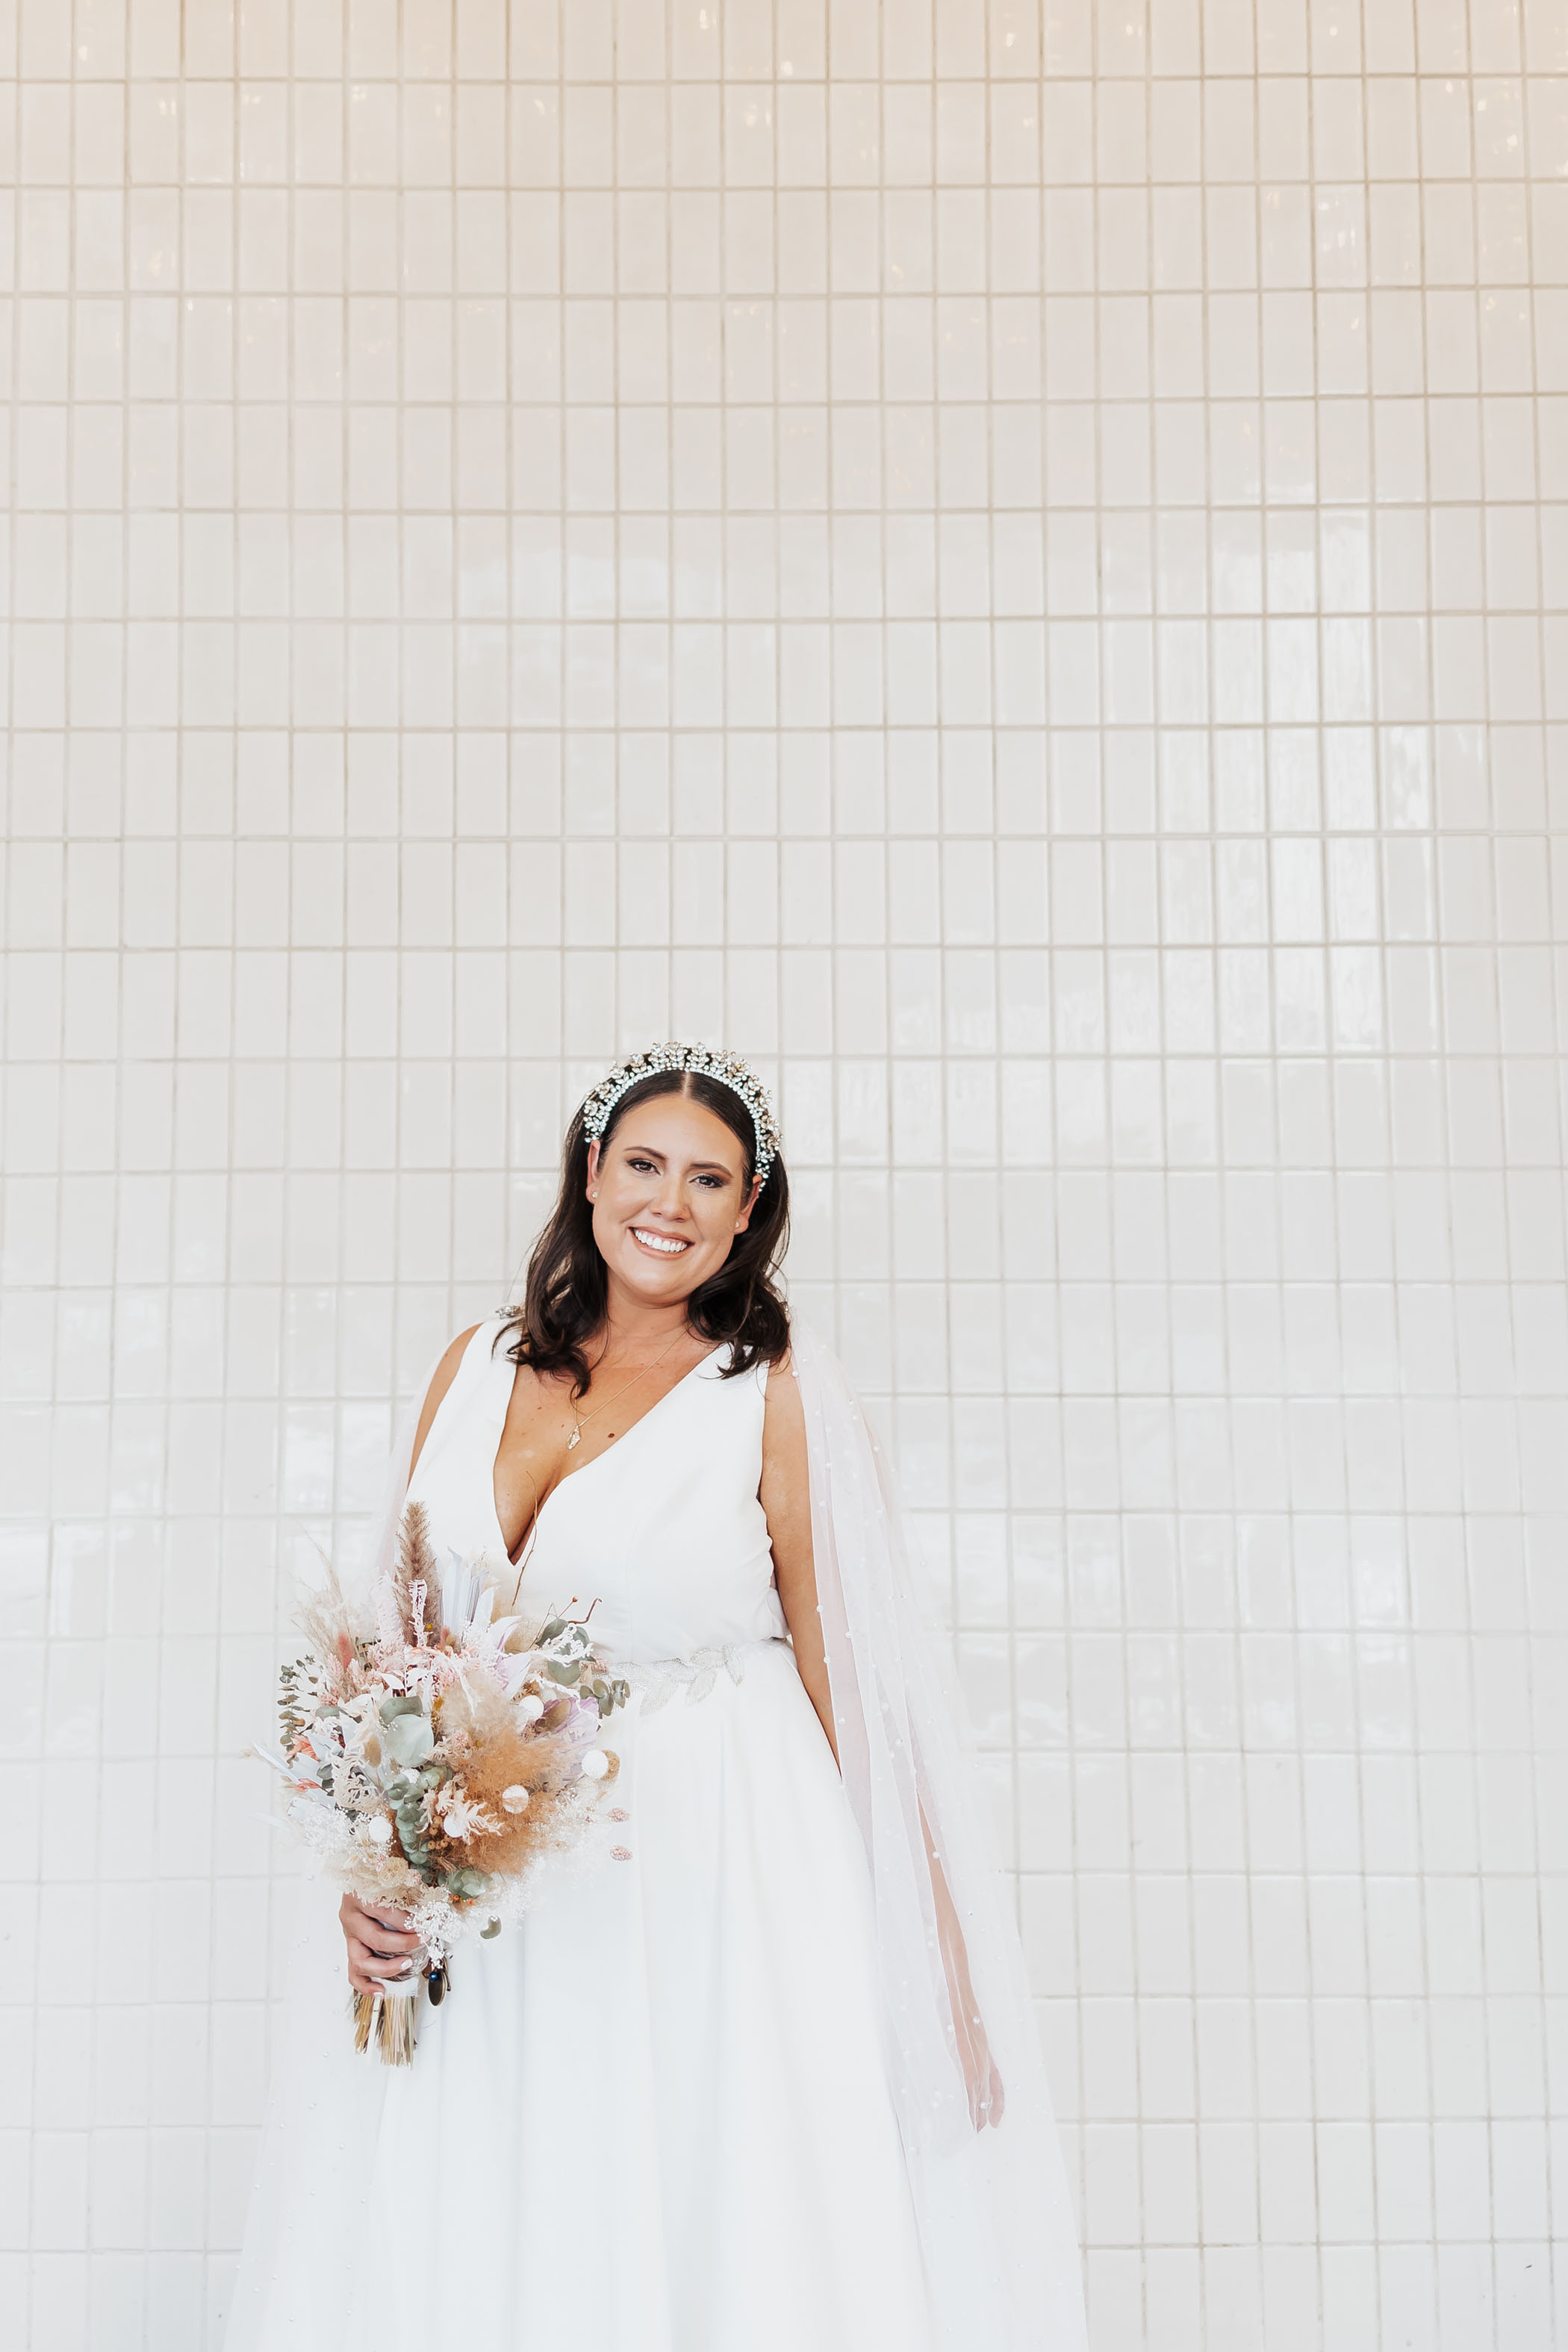 Las Vegas bride with jeweled headband and dried floral bouquet